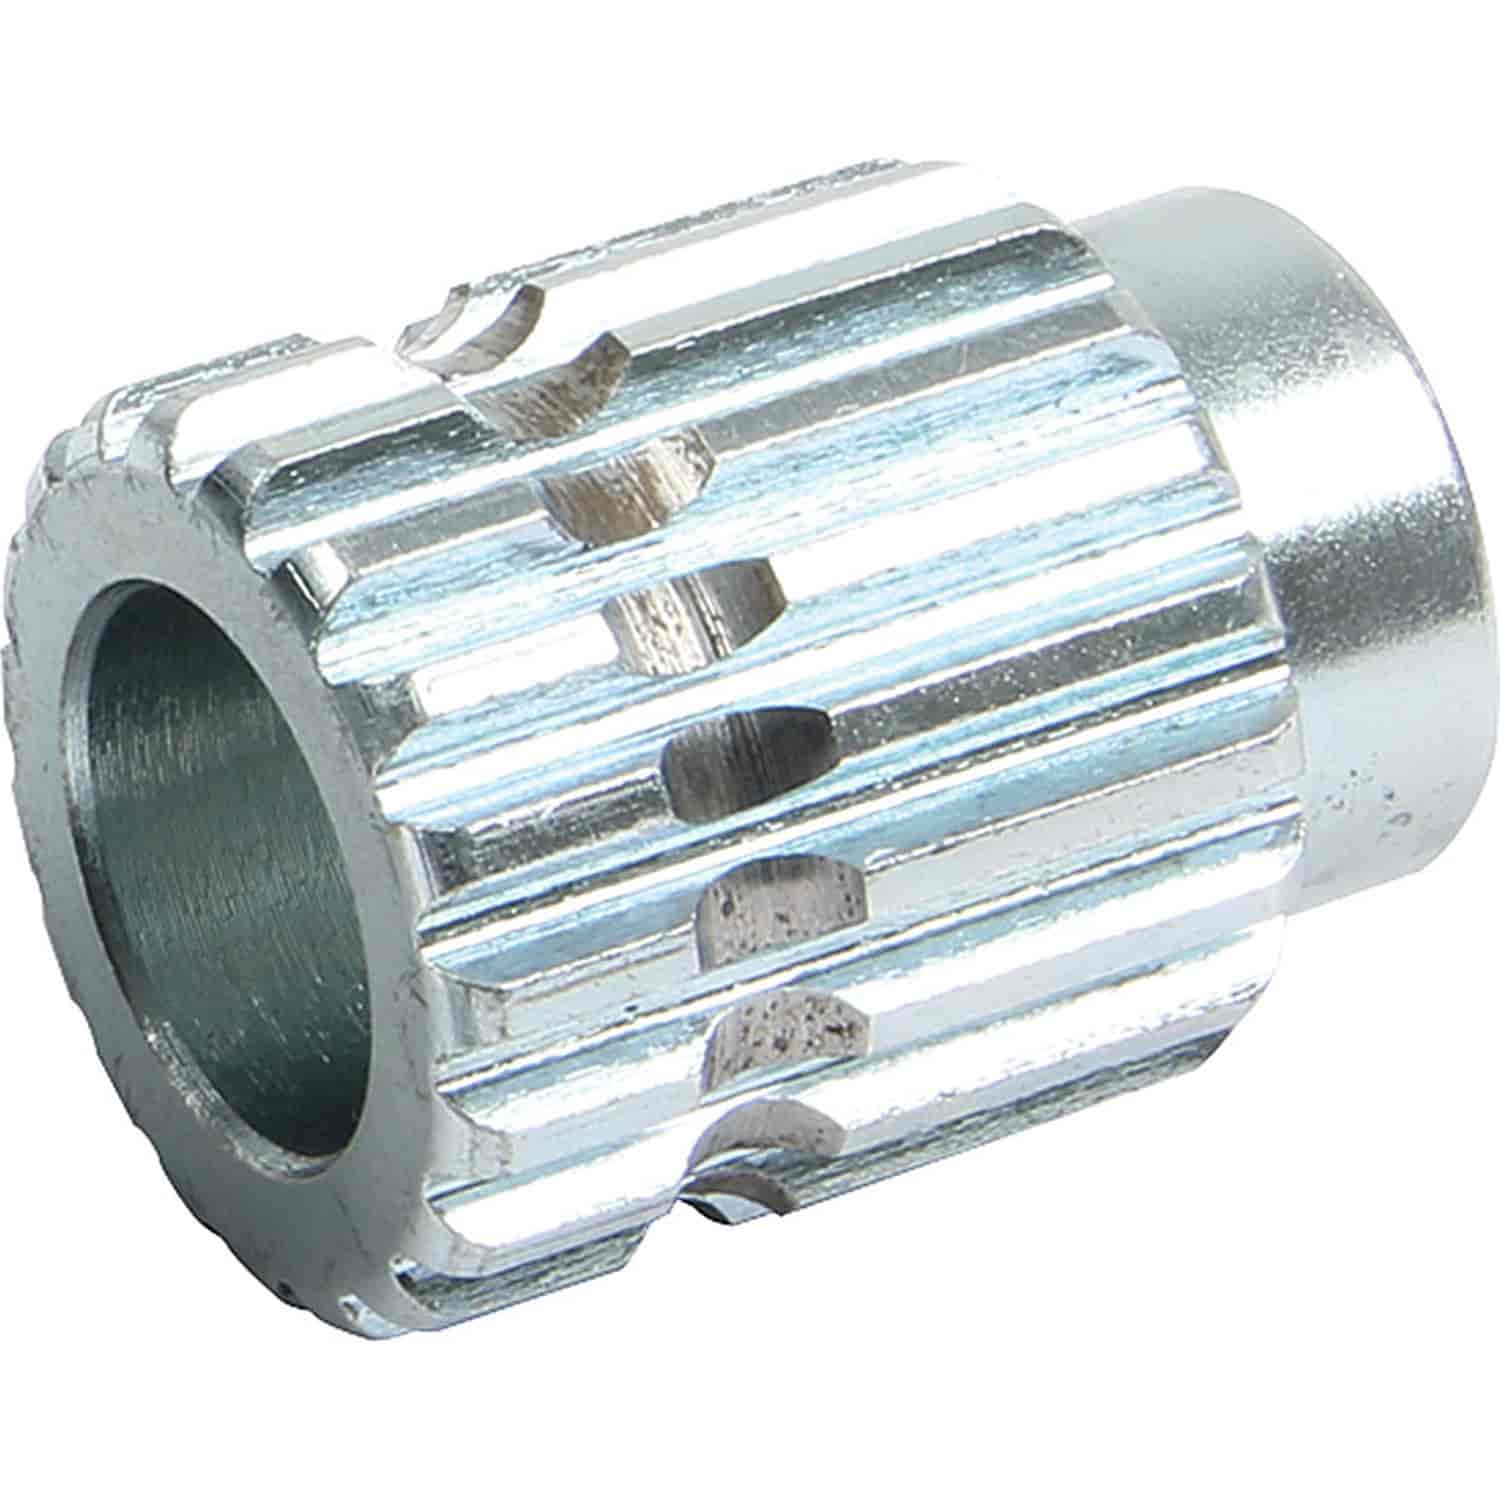 Replacement Spline Coupler For PN# 049-ALL52300